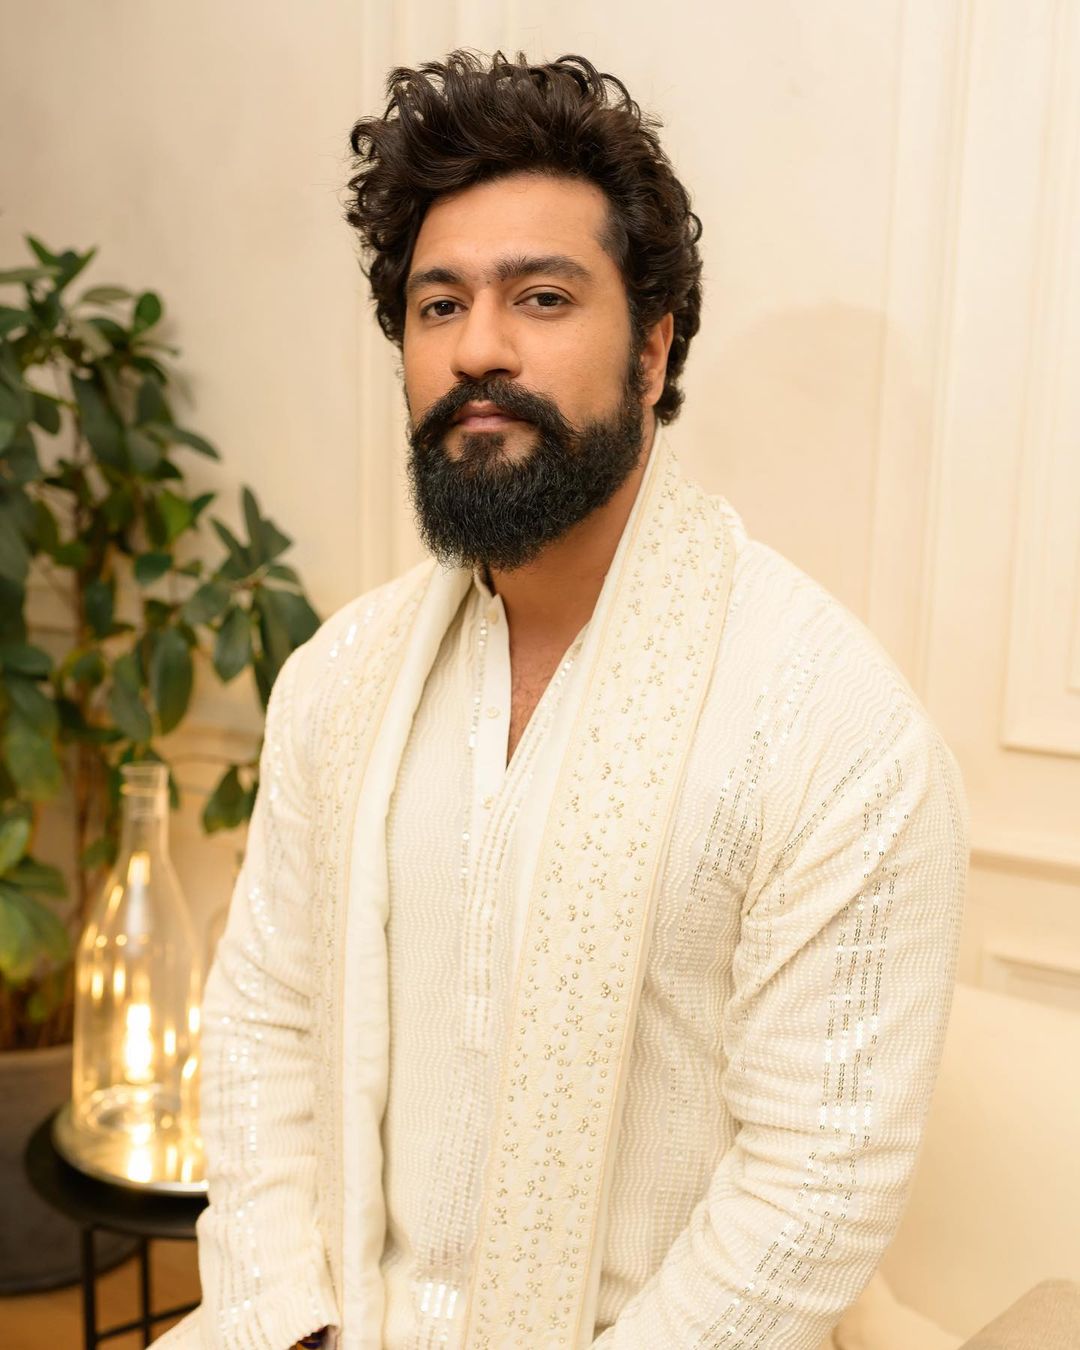 Vicky Kaushal Biography, Family, Wife, Girlfriends, DOB, Size, Weight, Height